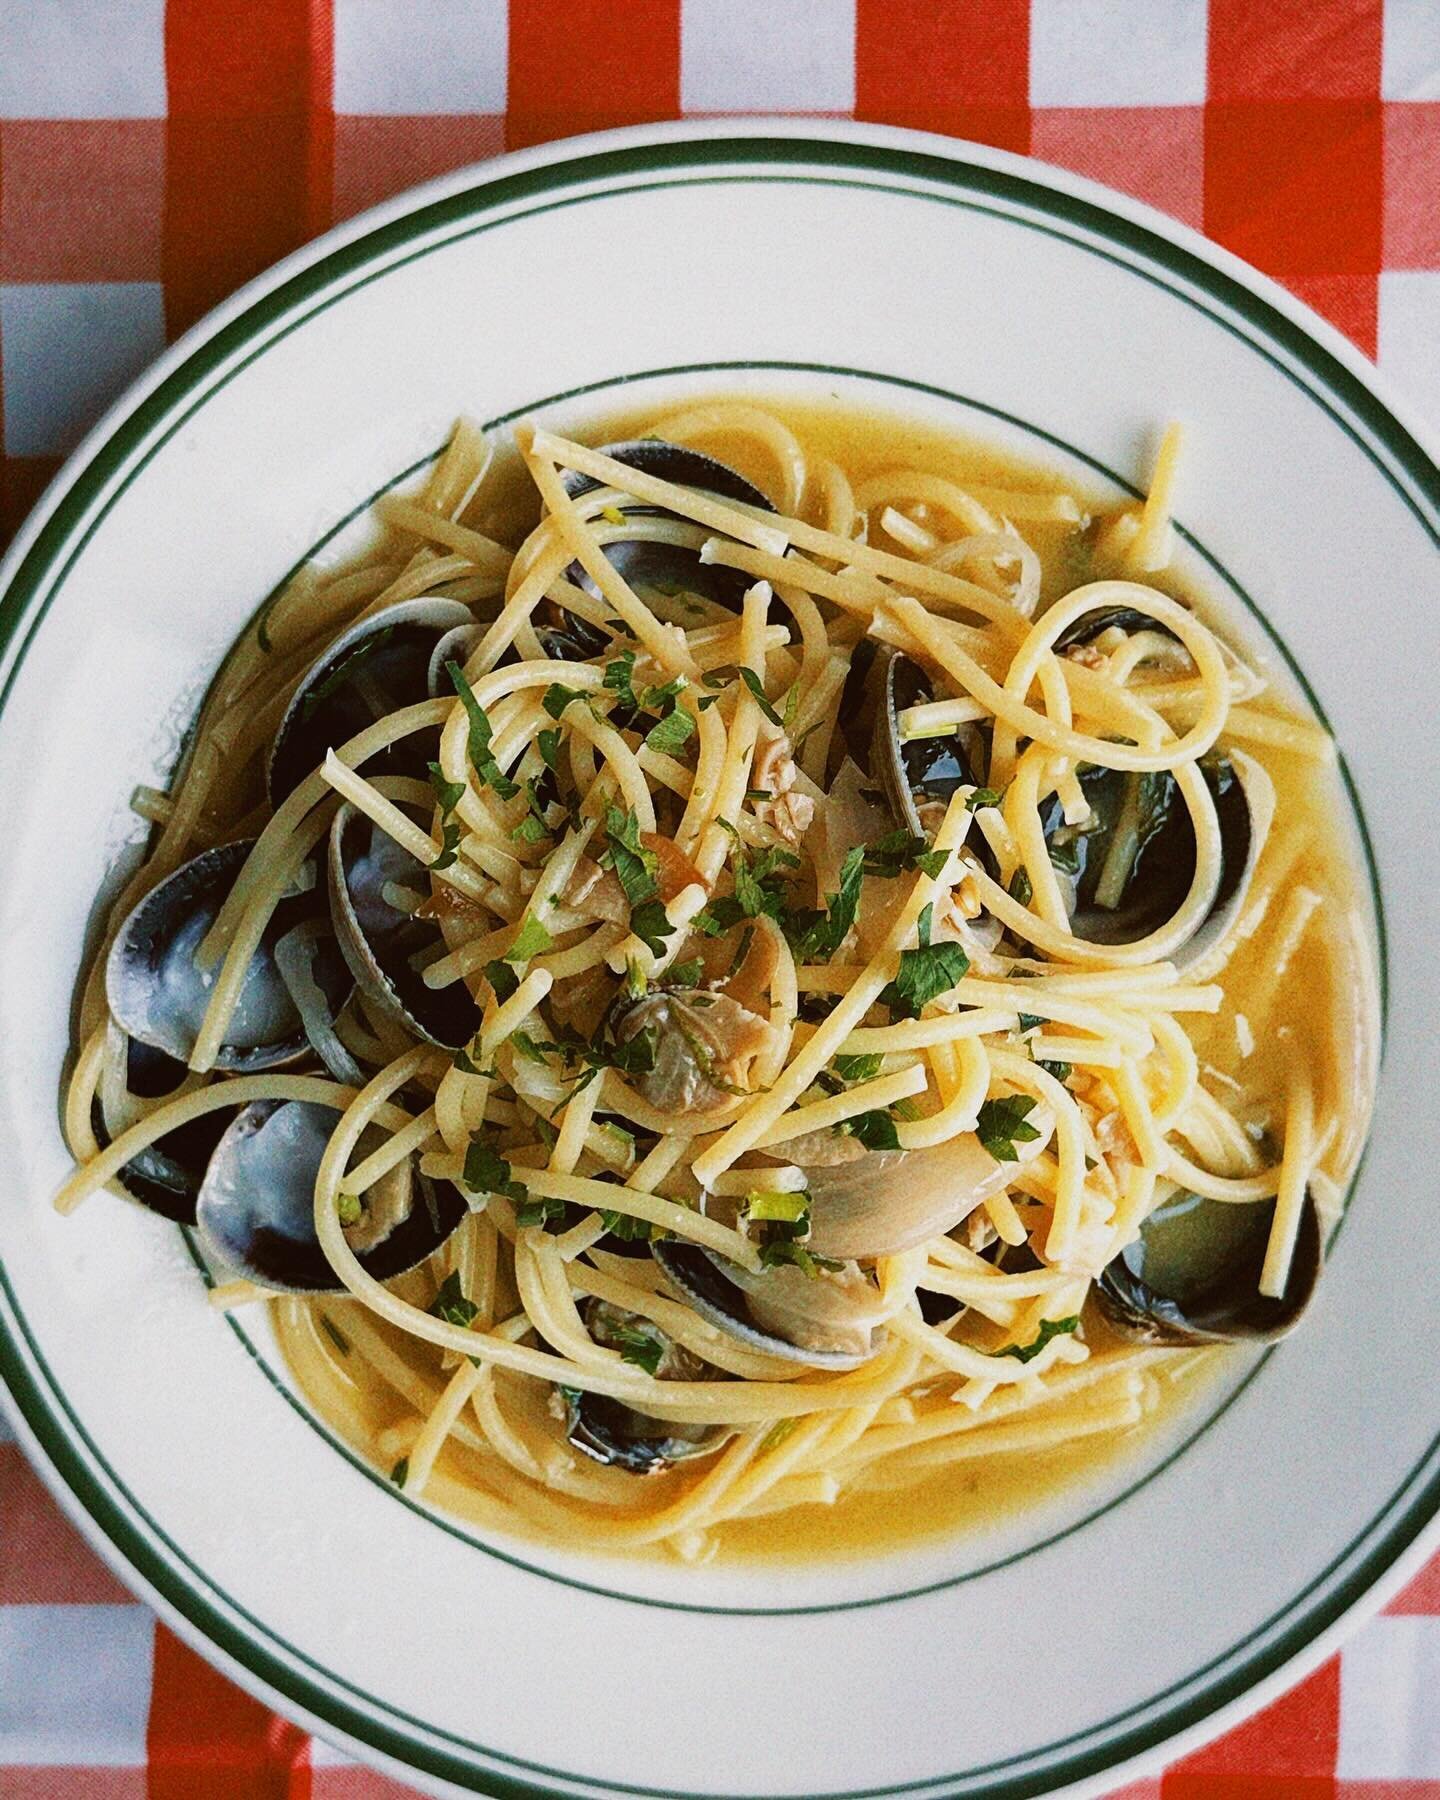 Spaghetti Alle Vongole #velma #restaurant #spaghetti #allevongole #clamsauce #clams #cockles #pasta #spring #special #offmenu #homestyle #daily #ridgewood #queens #nyc #italianamerican